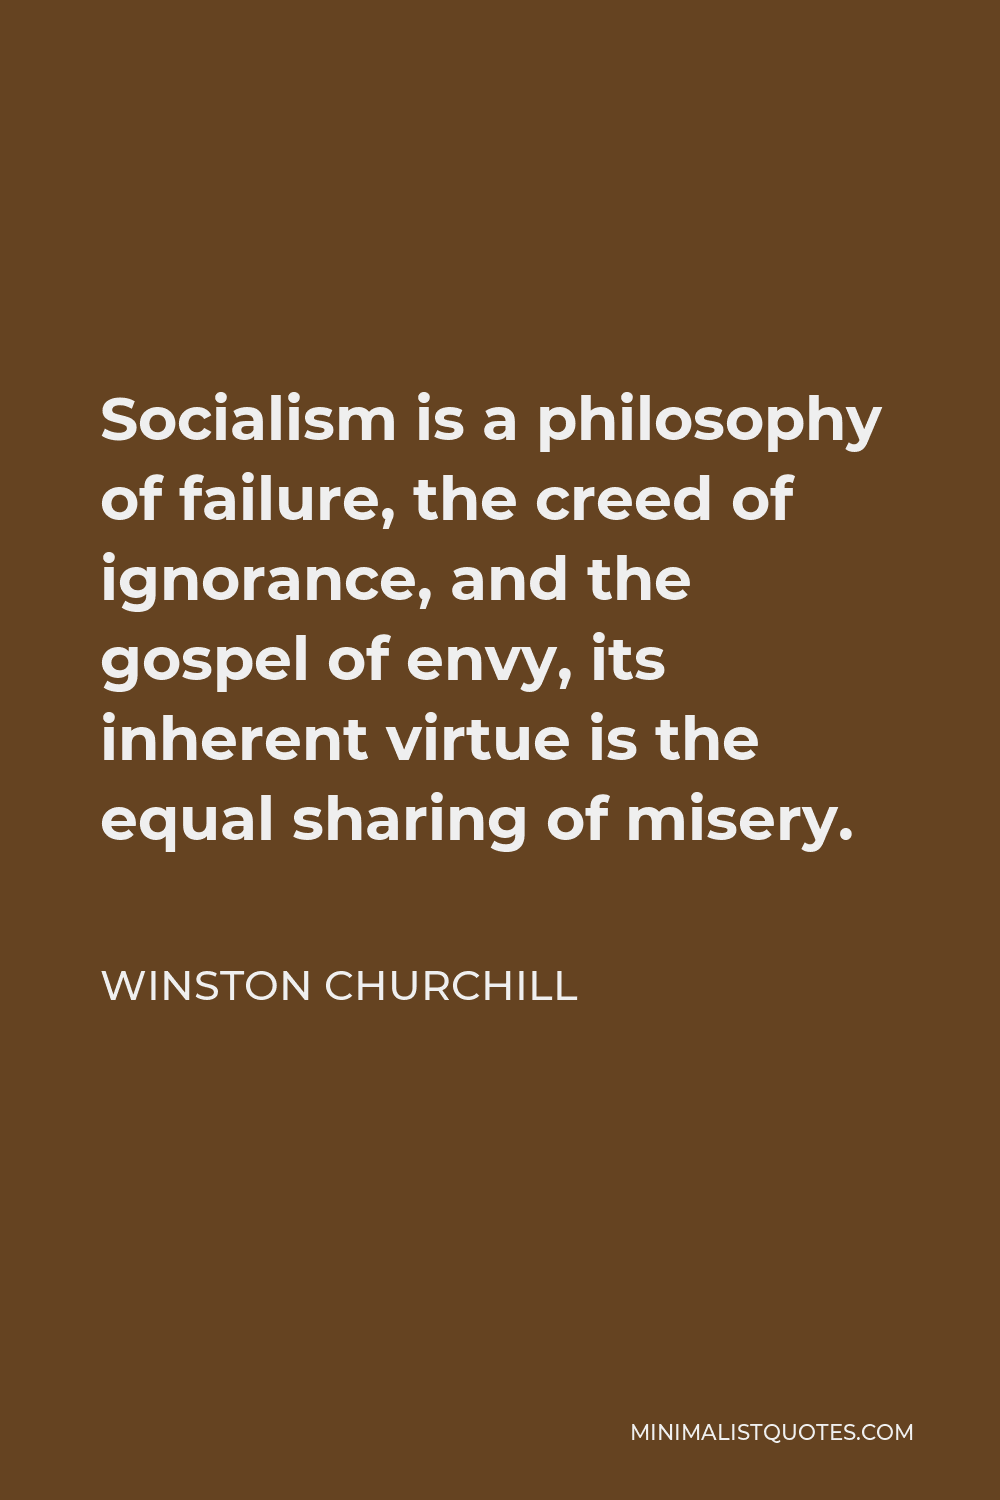 Winston Churchill Quote - Socialism is a philosophy of failure, the creed of ignorance, and the gospel of envy, its inherent virtue is the equal sharing of misery.